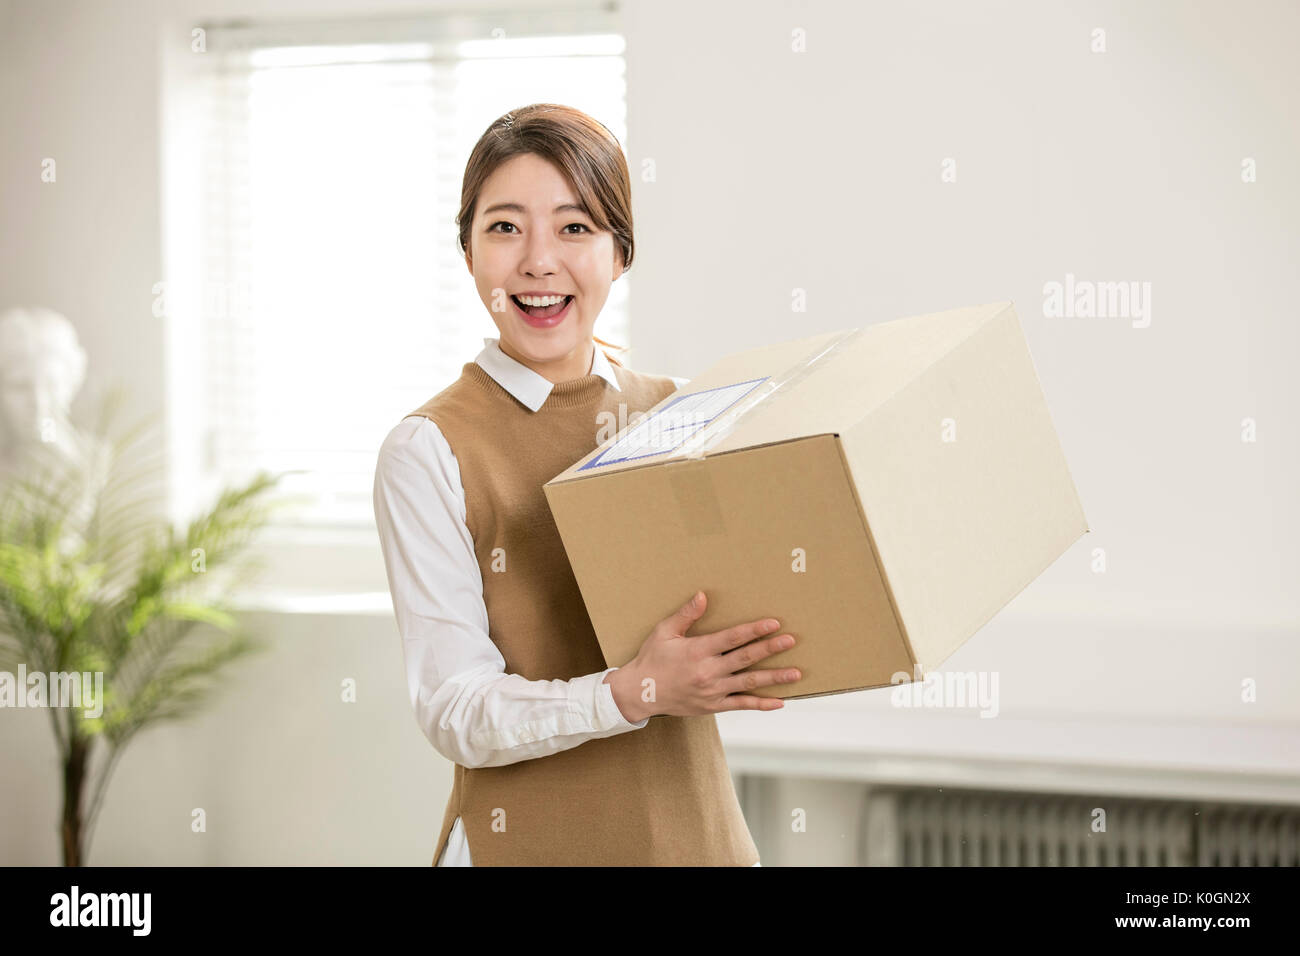 Young smiling woman with delivery box Stock Photo